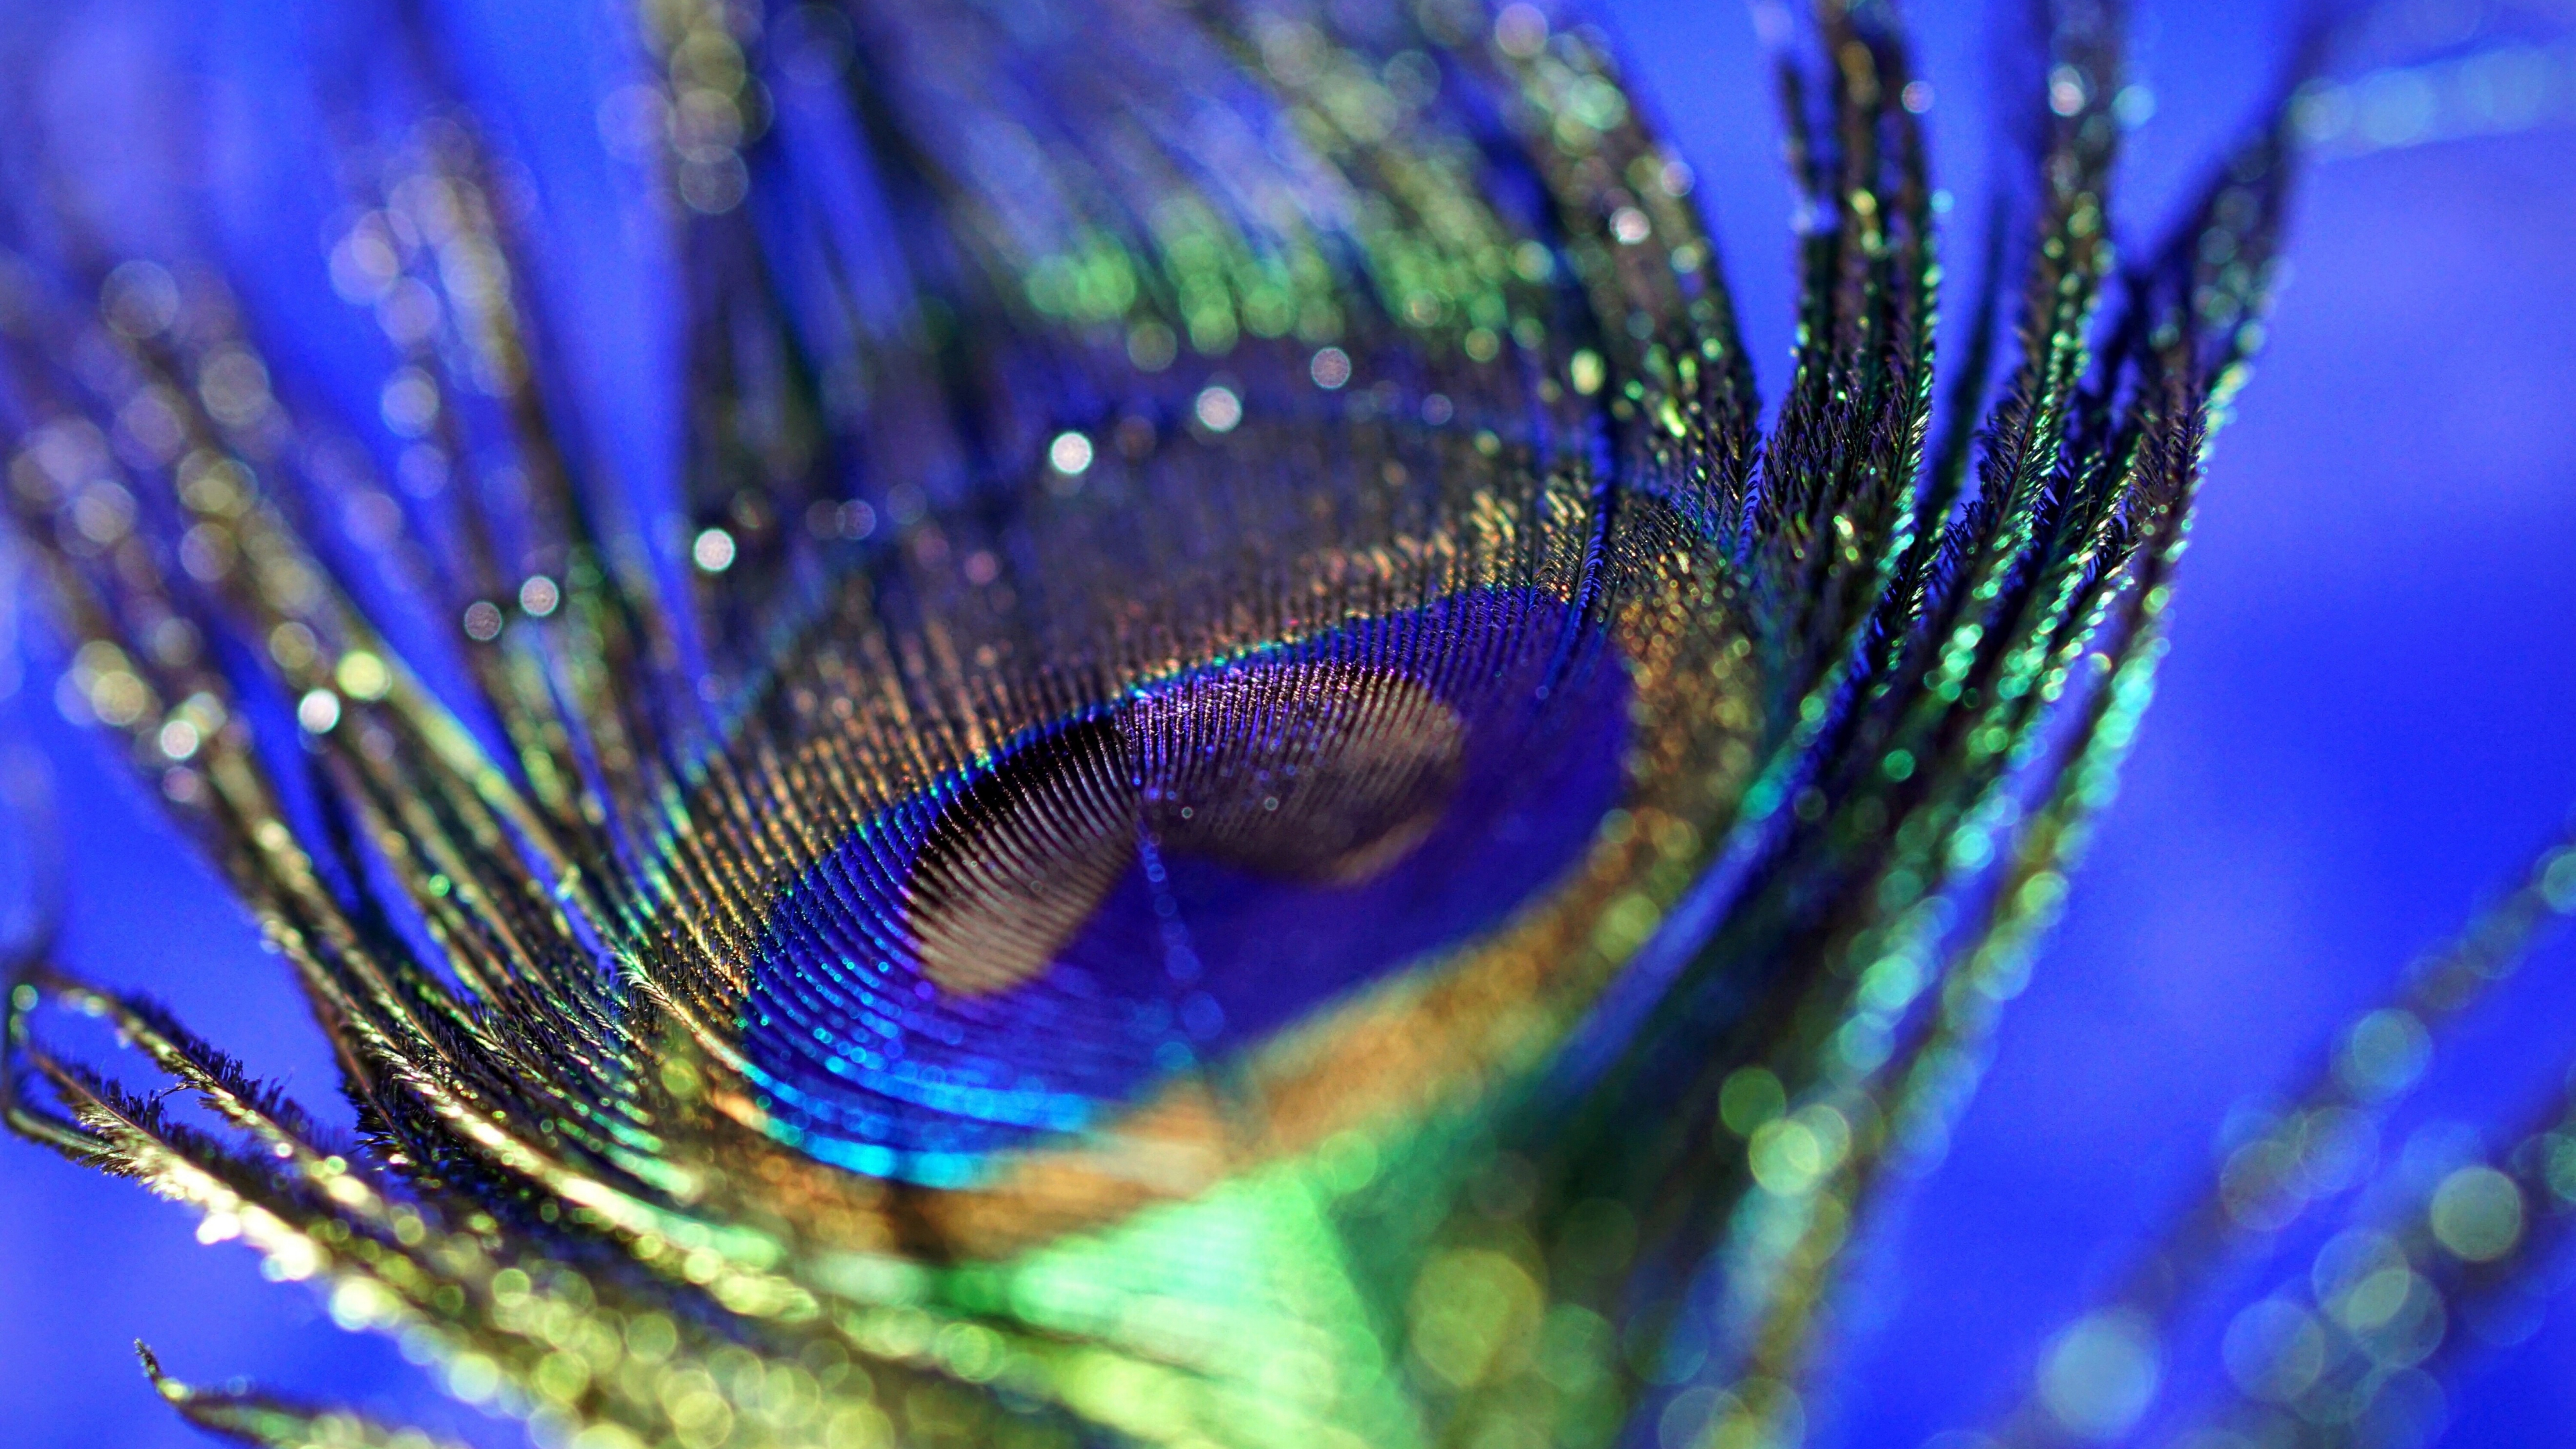 Download wallpaper 3840x2160 peacock, plumage, feather, colorful, close up,  bokeh 4k wallpaper, uhd wallpaper, 16:9 widescreen 3840x2160 hd background,  1837